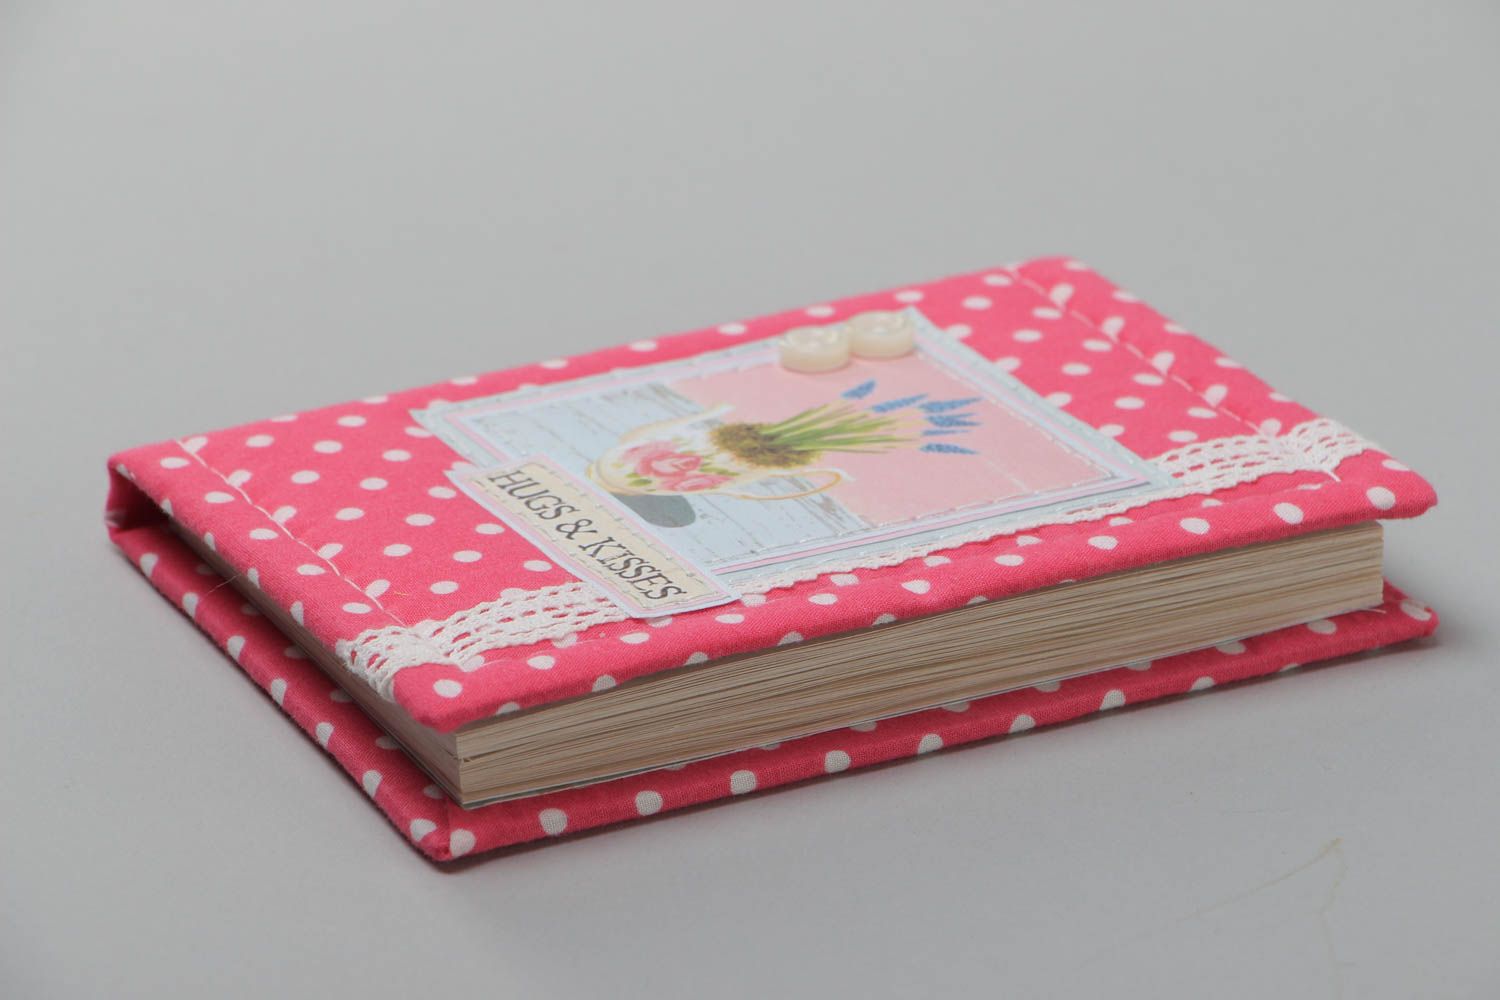 Handmade notebook with soft cover of pink color with white polka dot pattern and lace photo 3